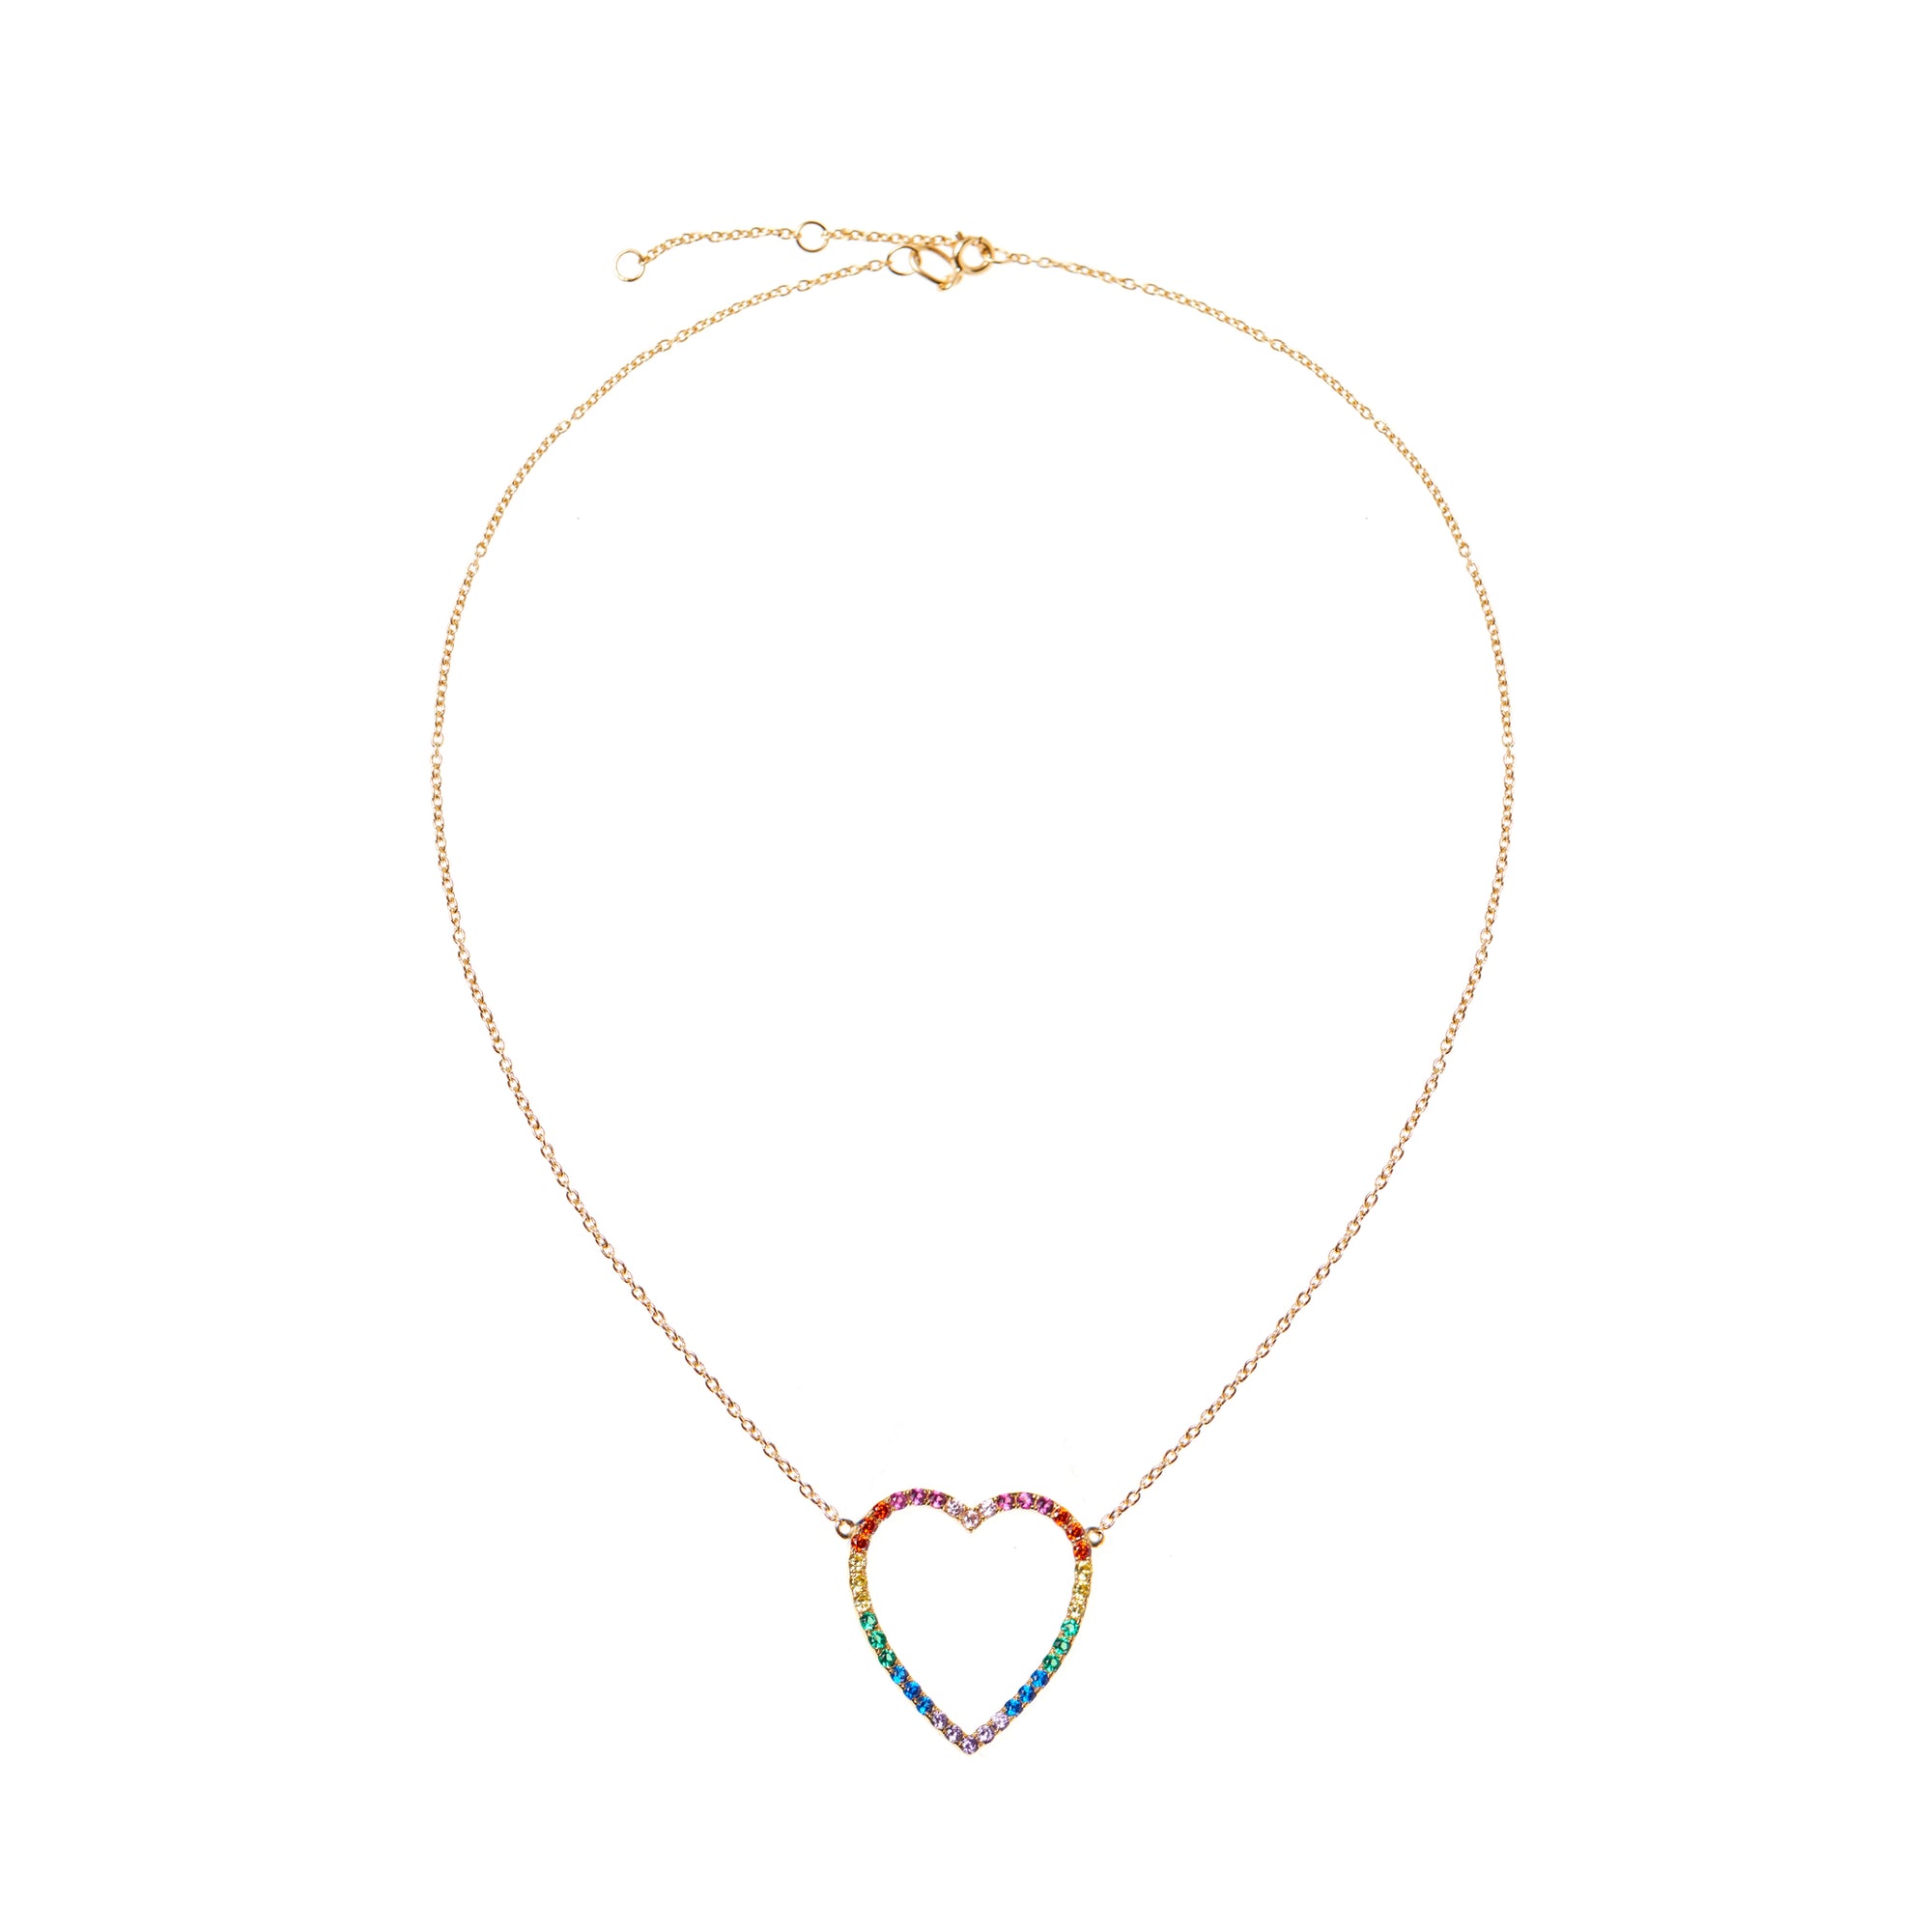 Necklace 'Gold Heart' – Multi